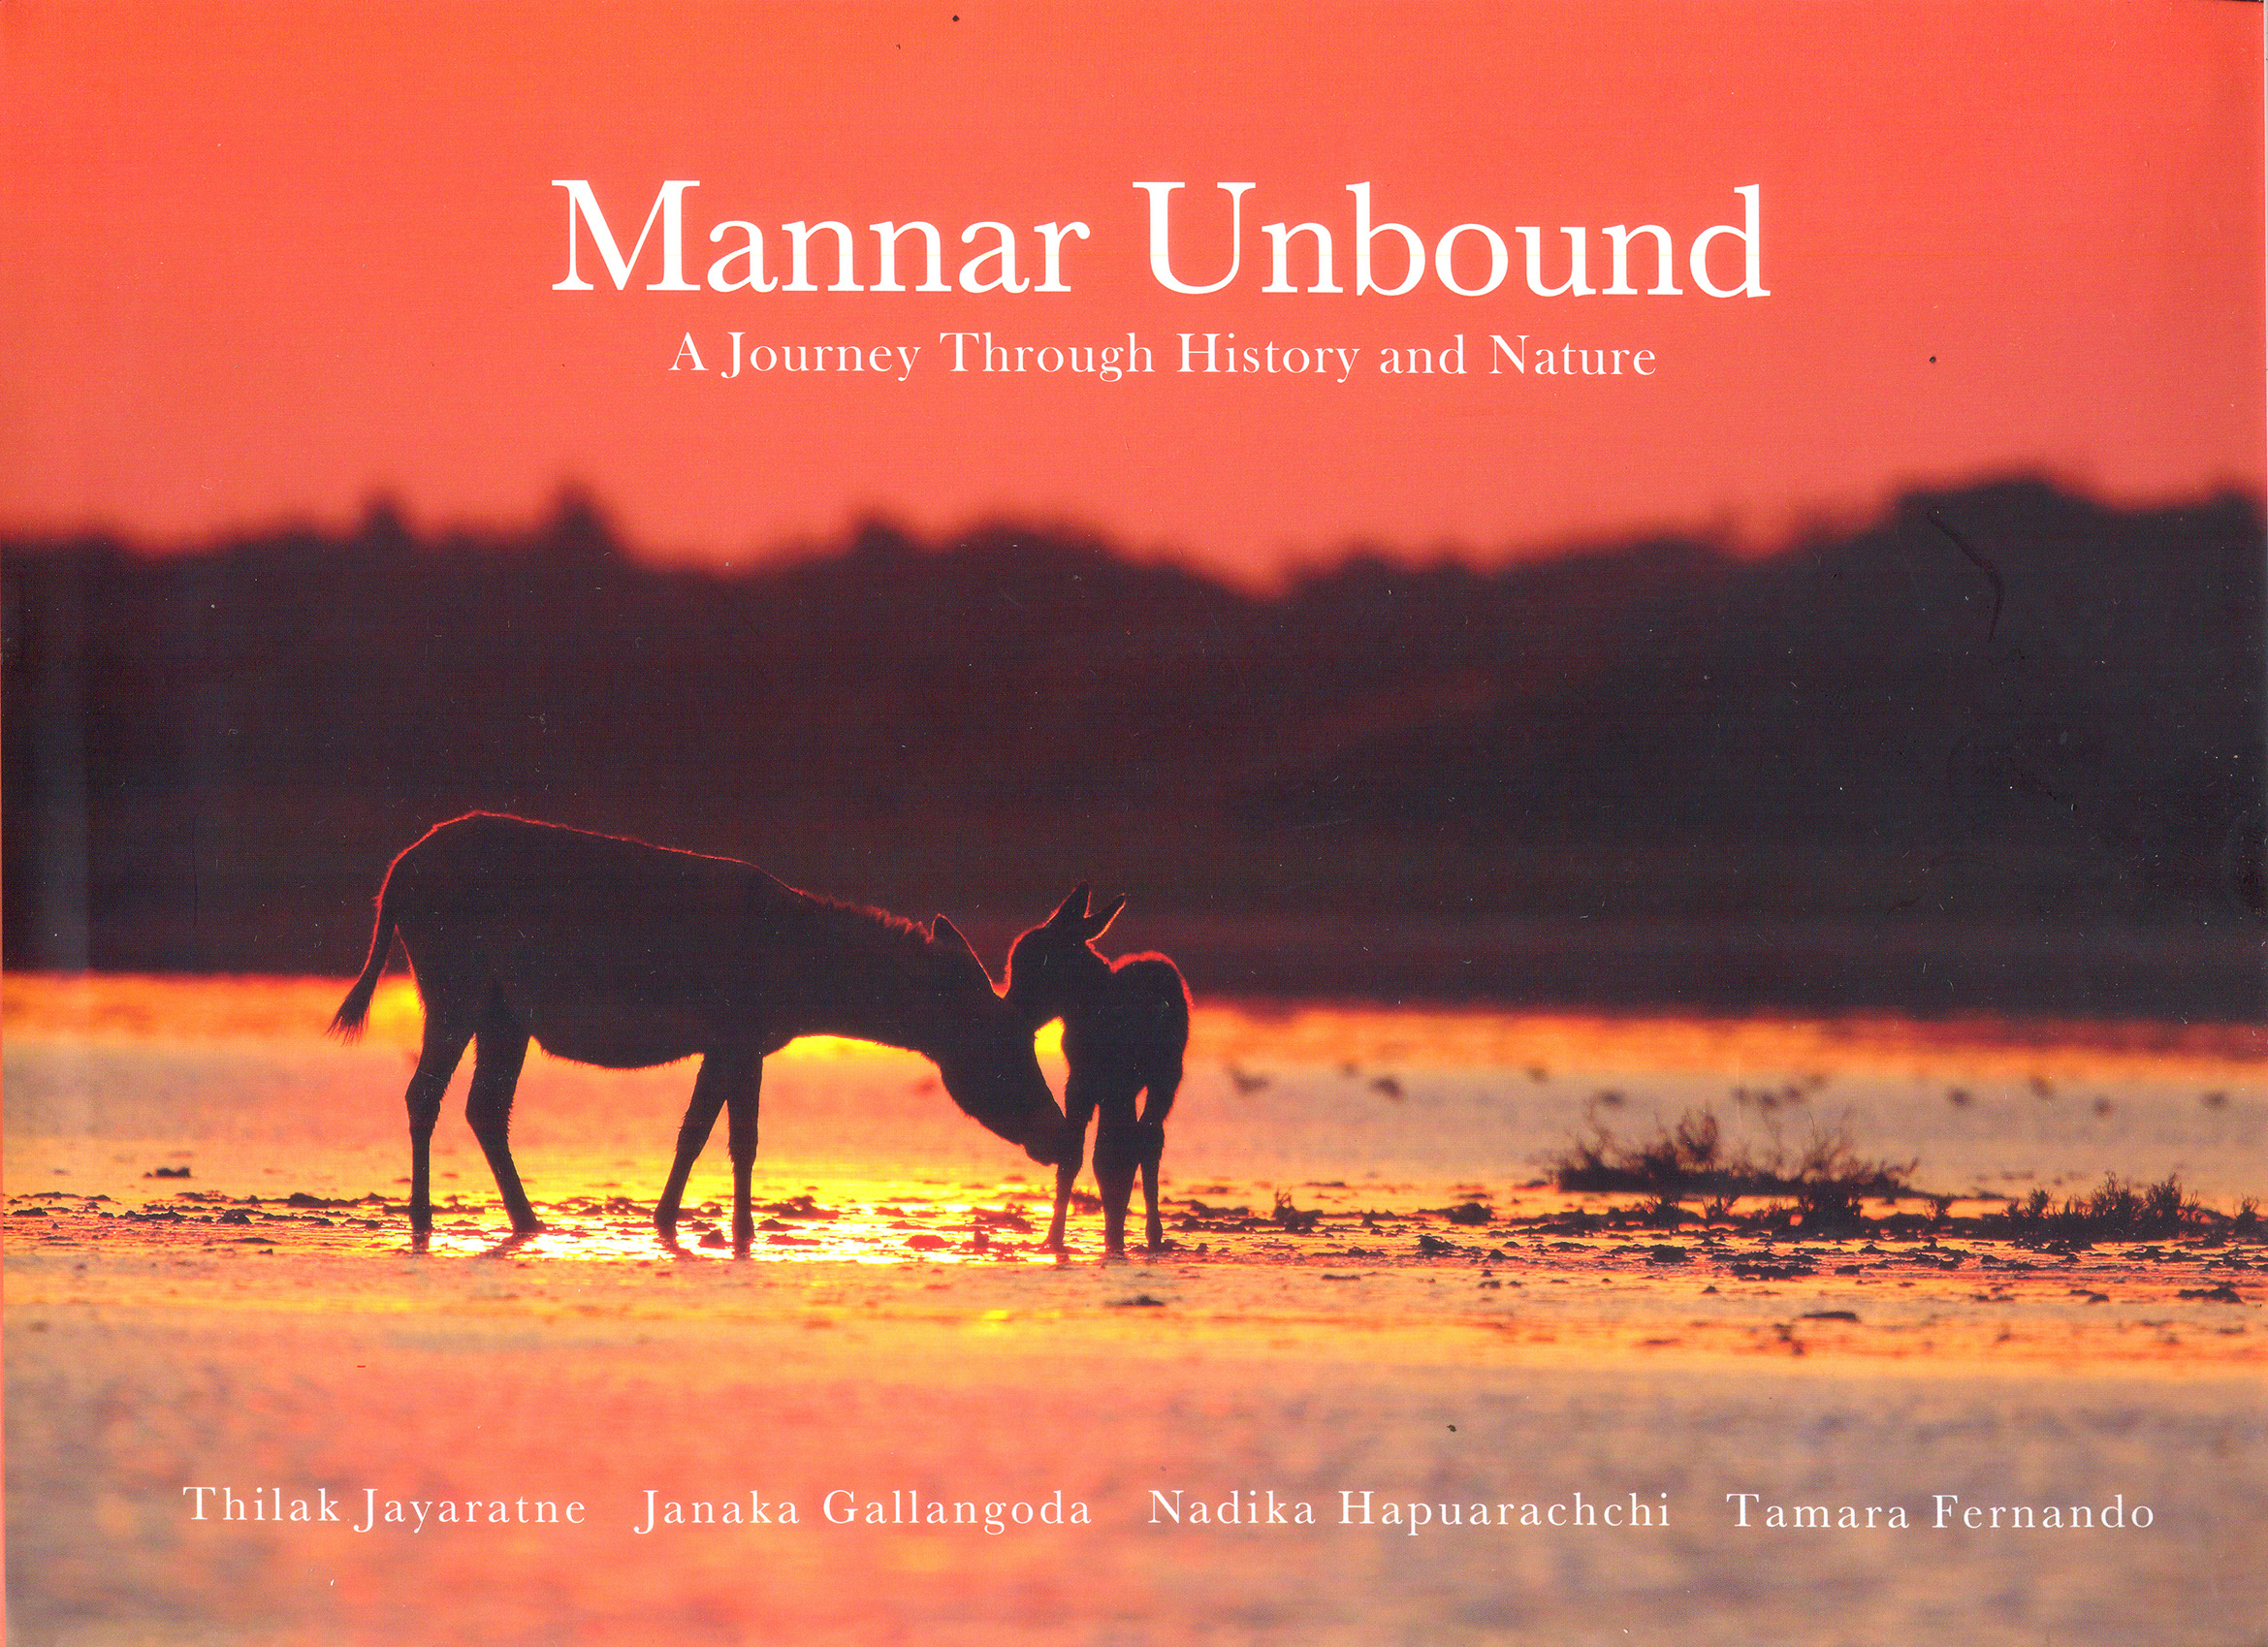 Mannar Unbound: A journey through history and nature